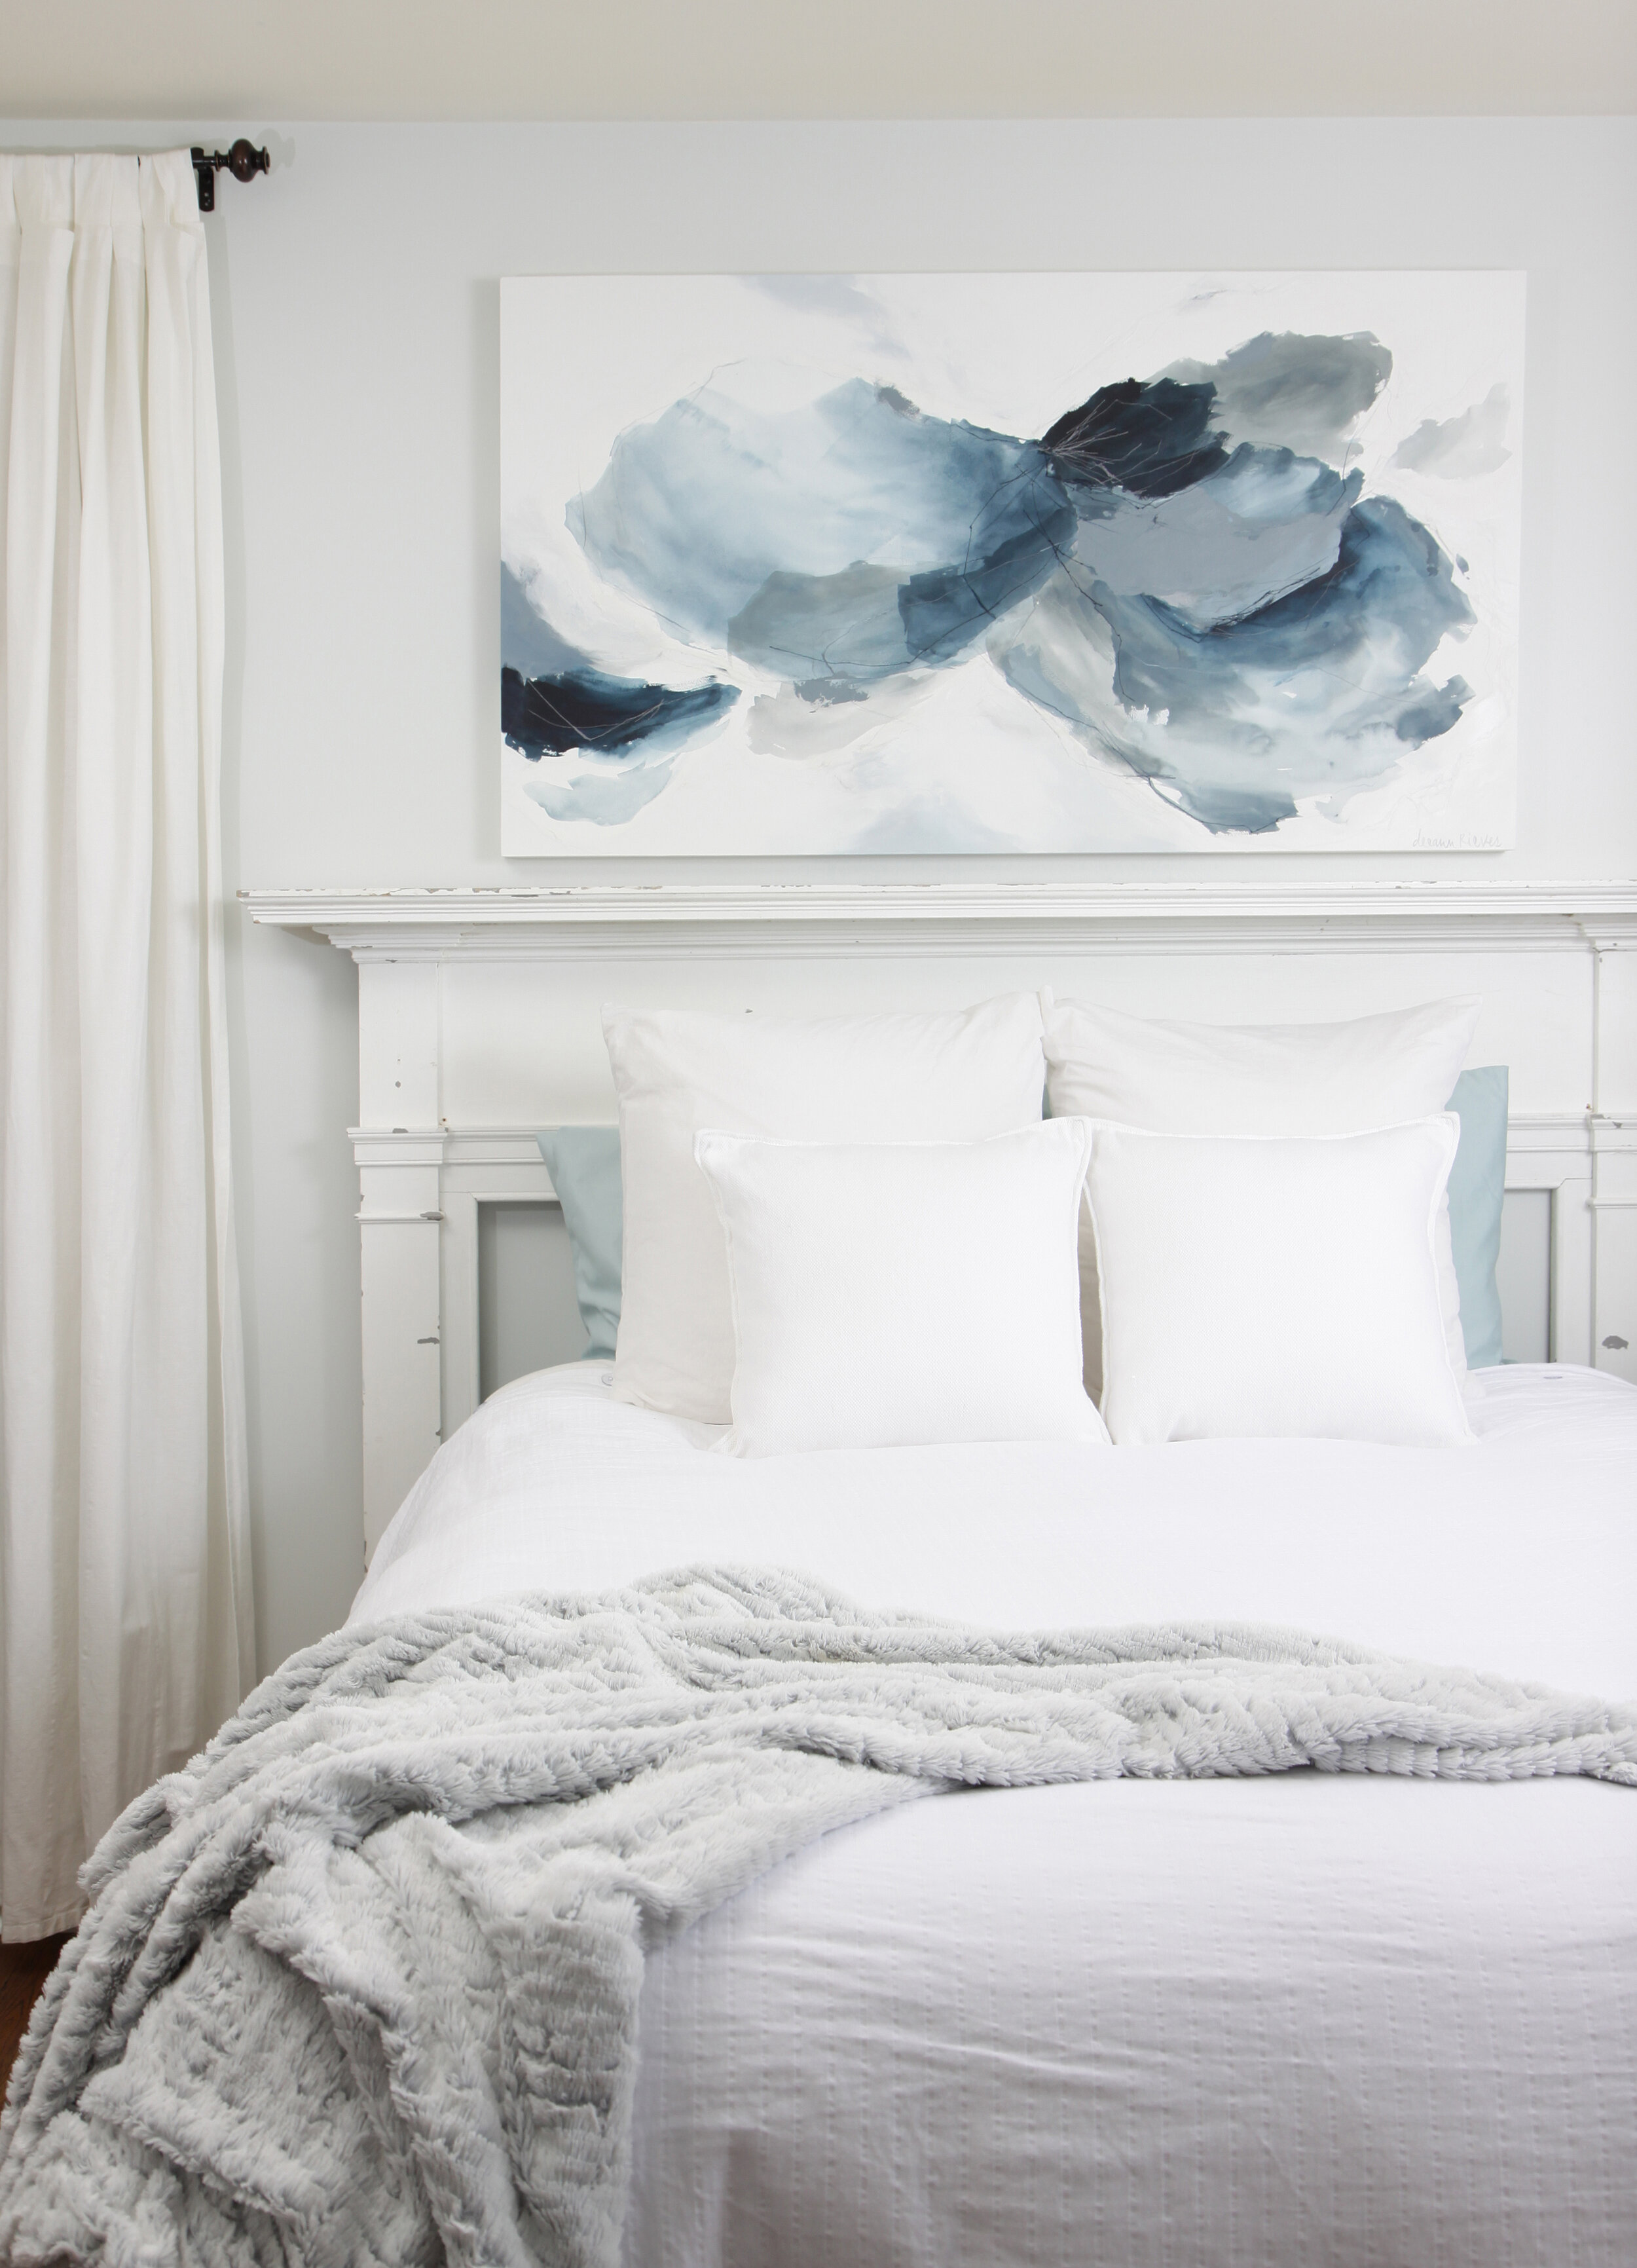 Deeann-Rieves-Abstract-Painting-Above-Bed-Blues.jpg